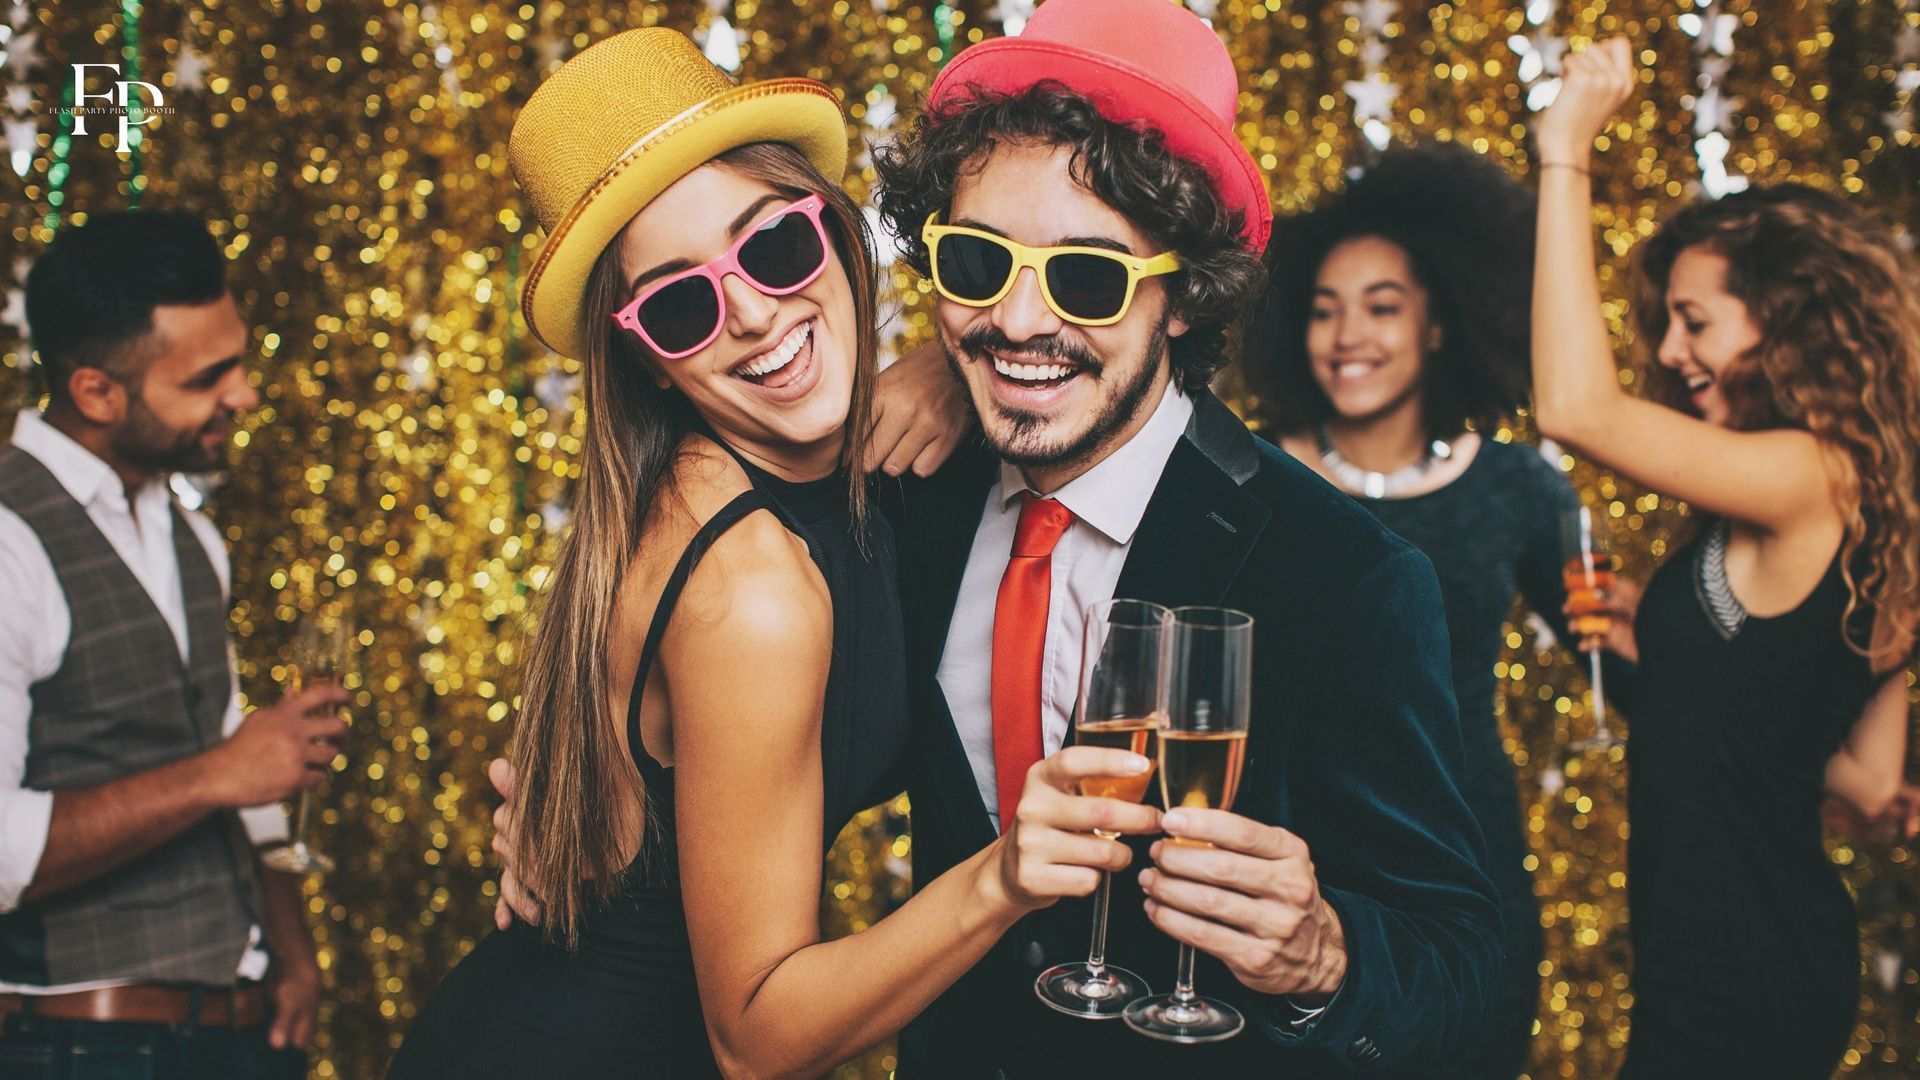 A man and woman posing at a sparkly photo booth backdrop during a graduation party in Manor holding up their drinks